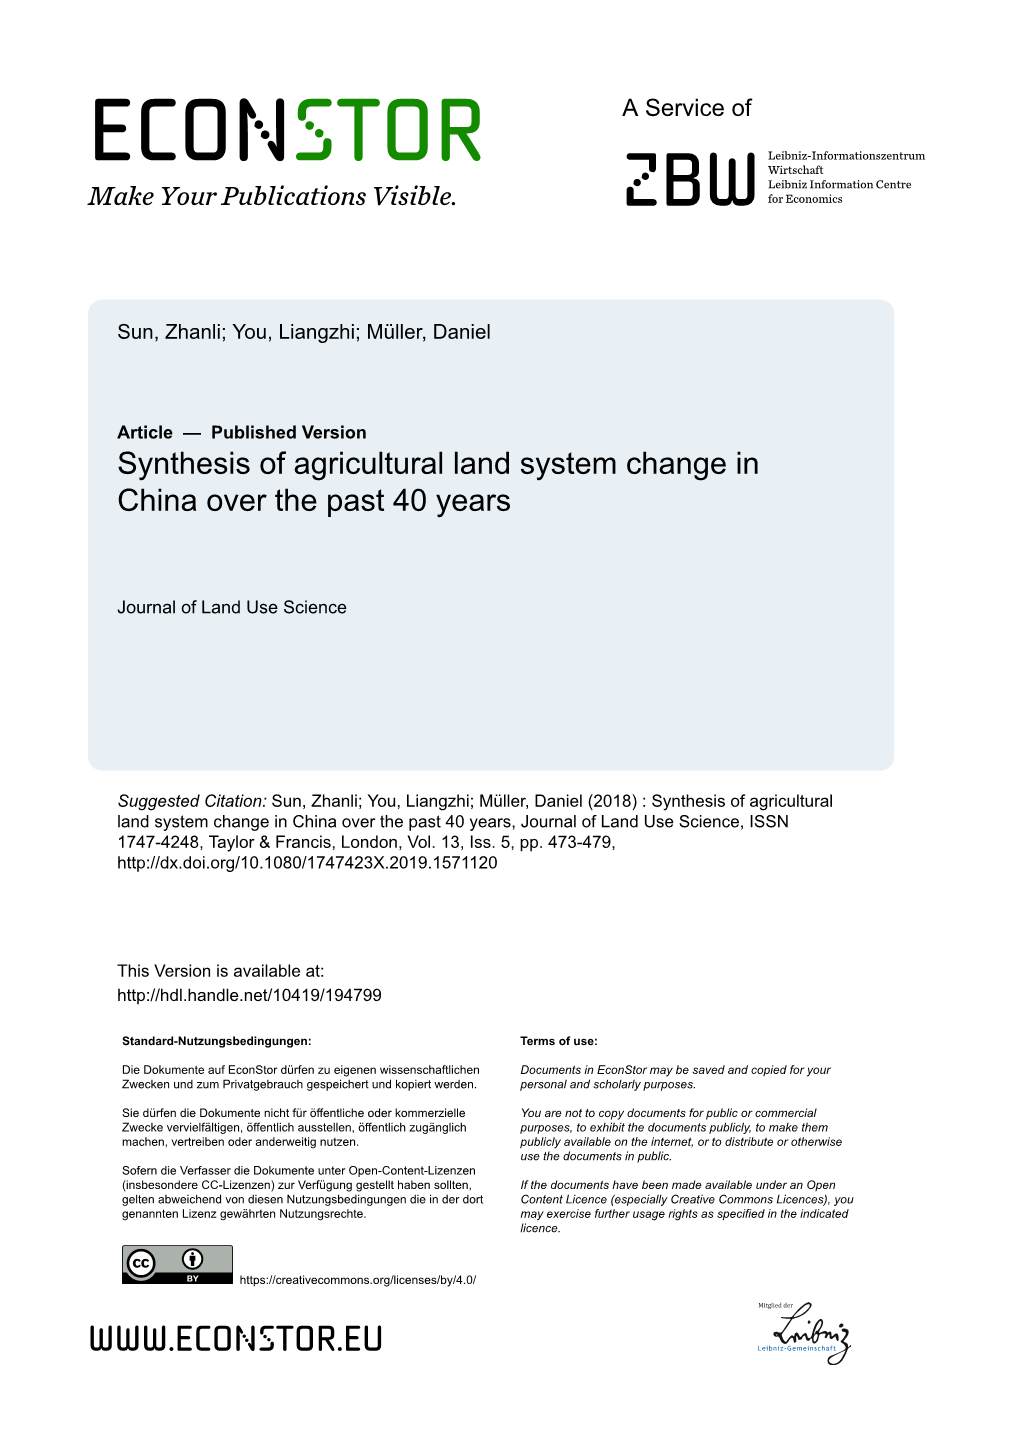 Synthesis of Agricultural Land System Change in China Over the Past 40 Years